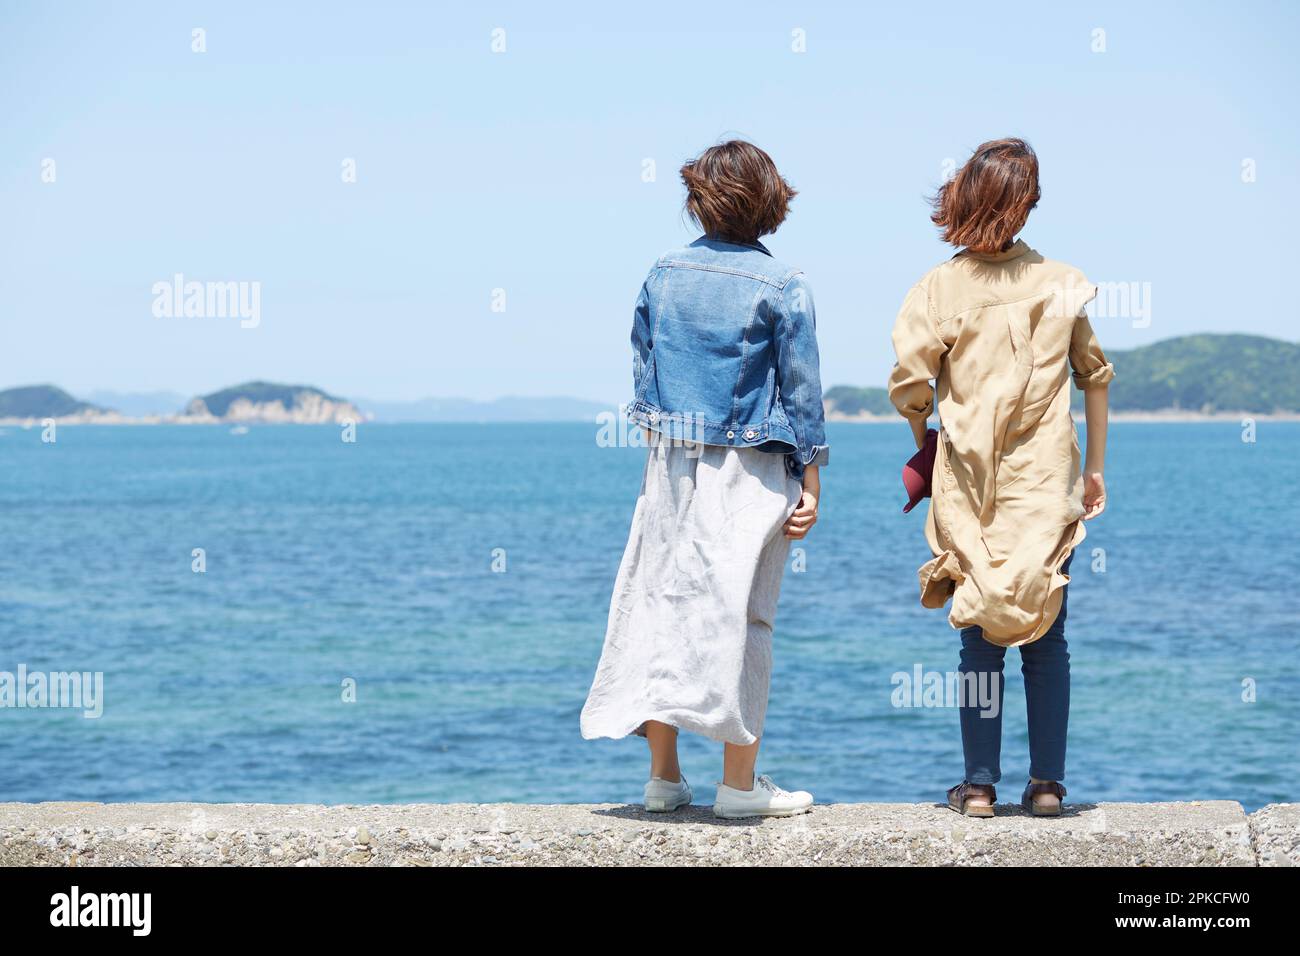 Rear view of two women looking out to sea on embankment Stock Photo